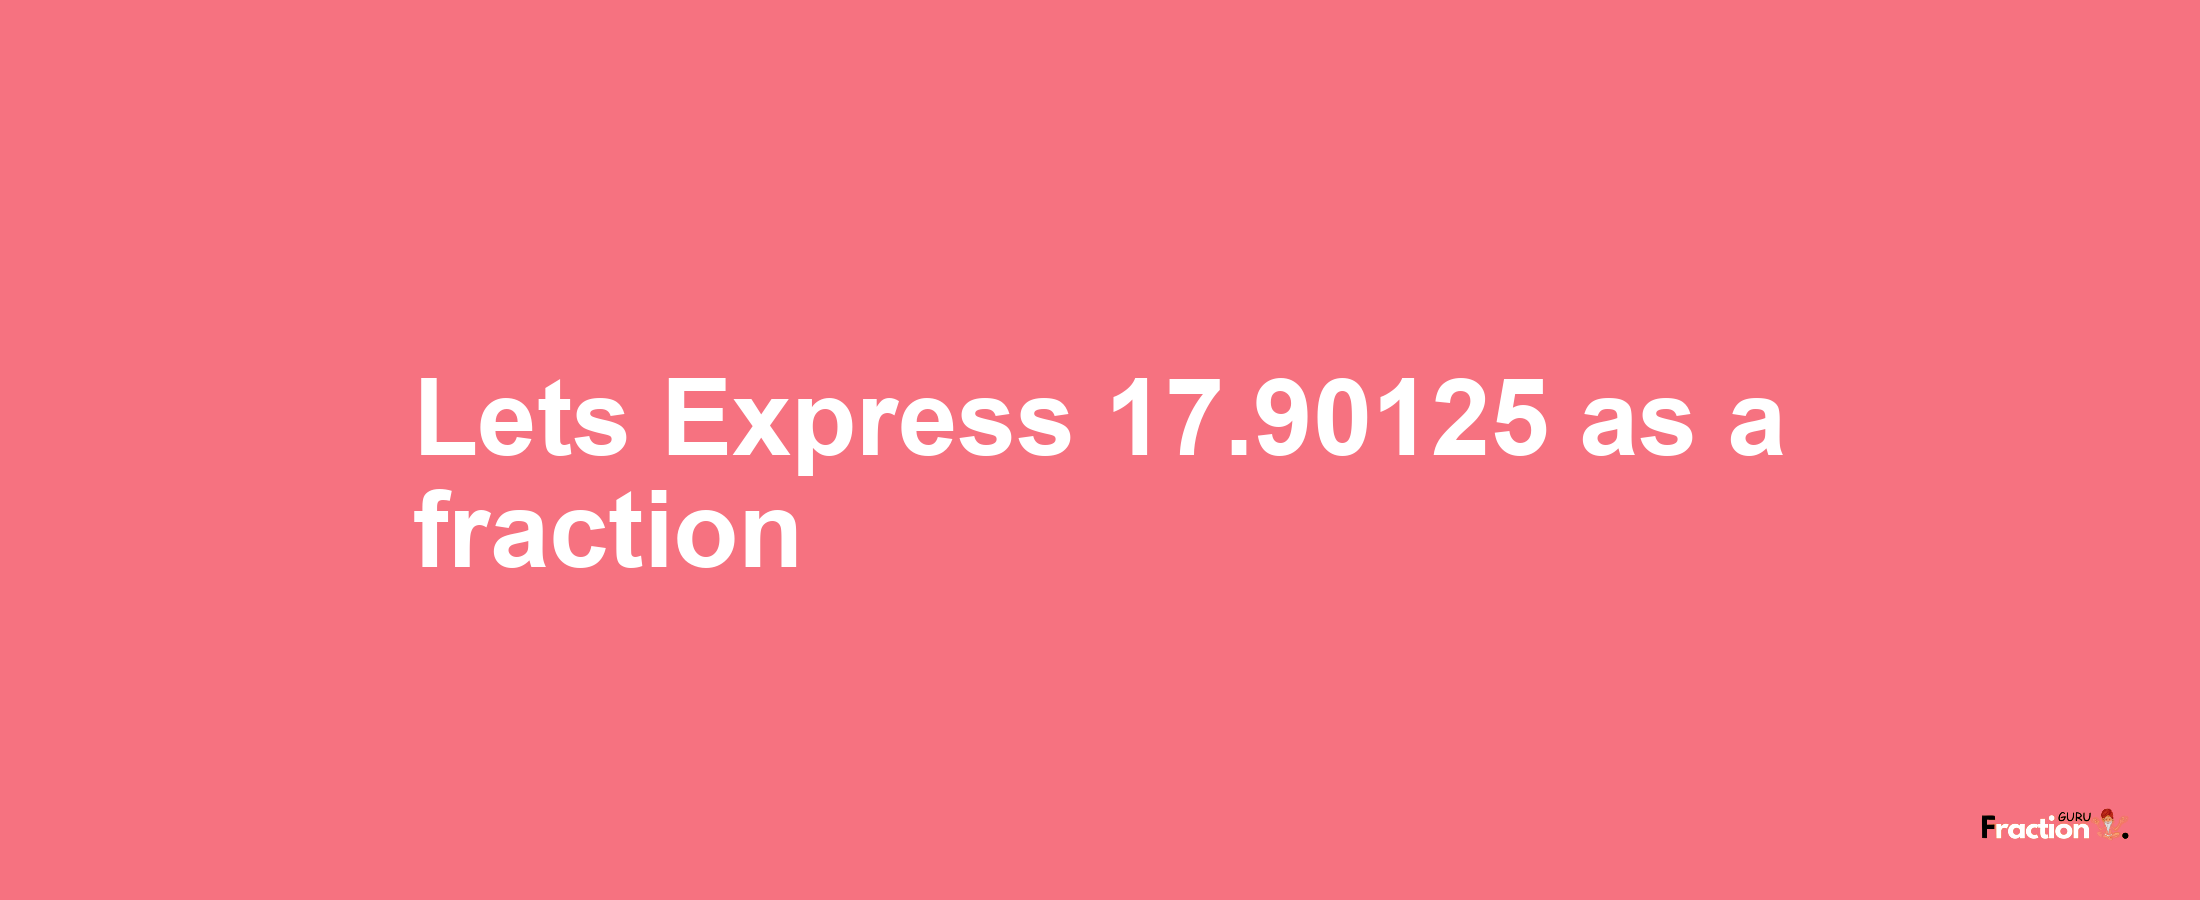 Lets Express 17.90125 as afraction